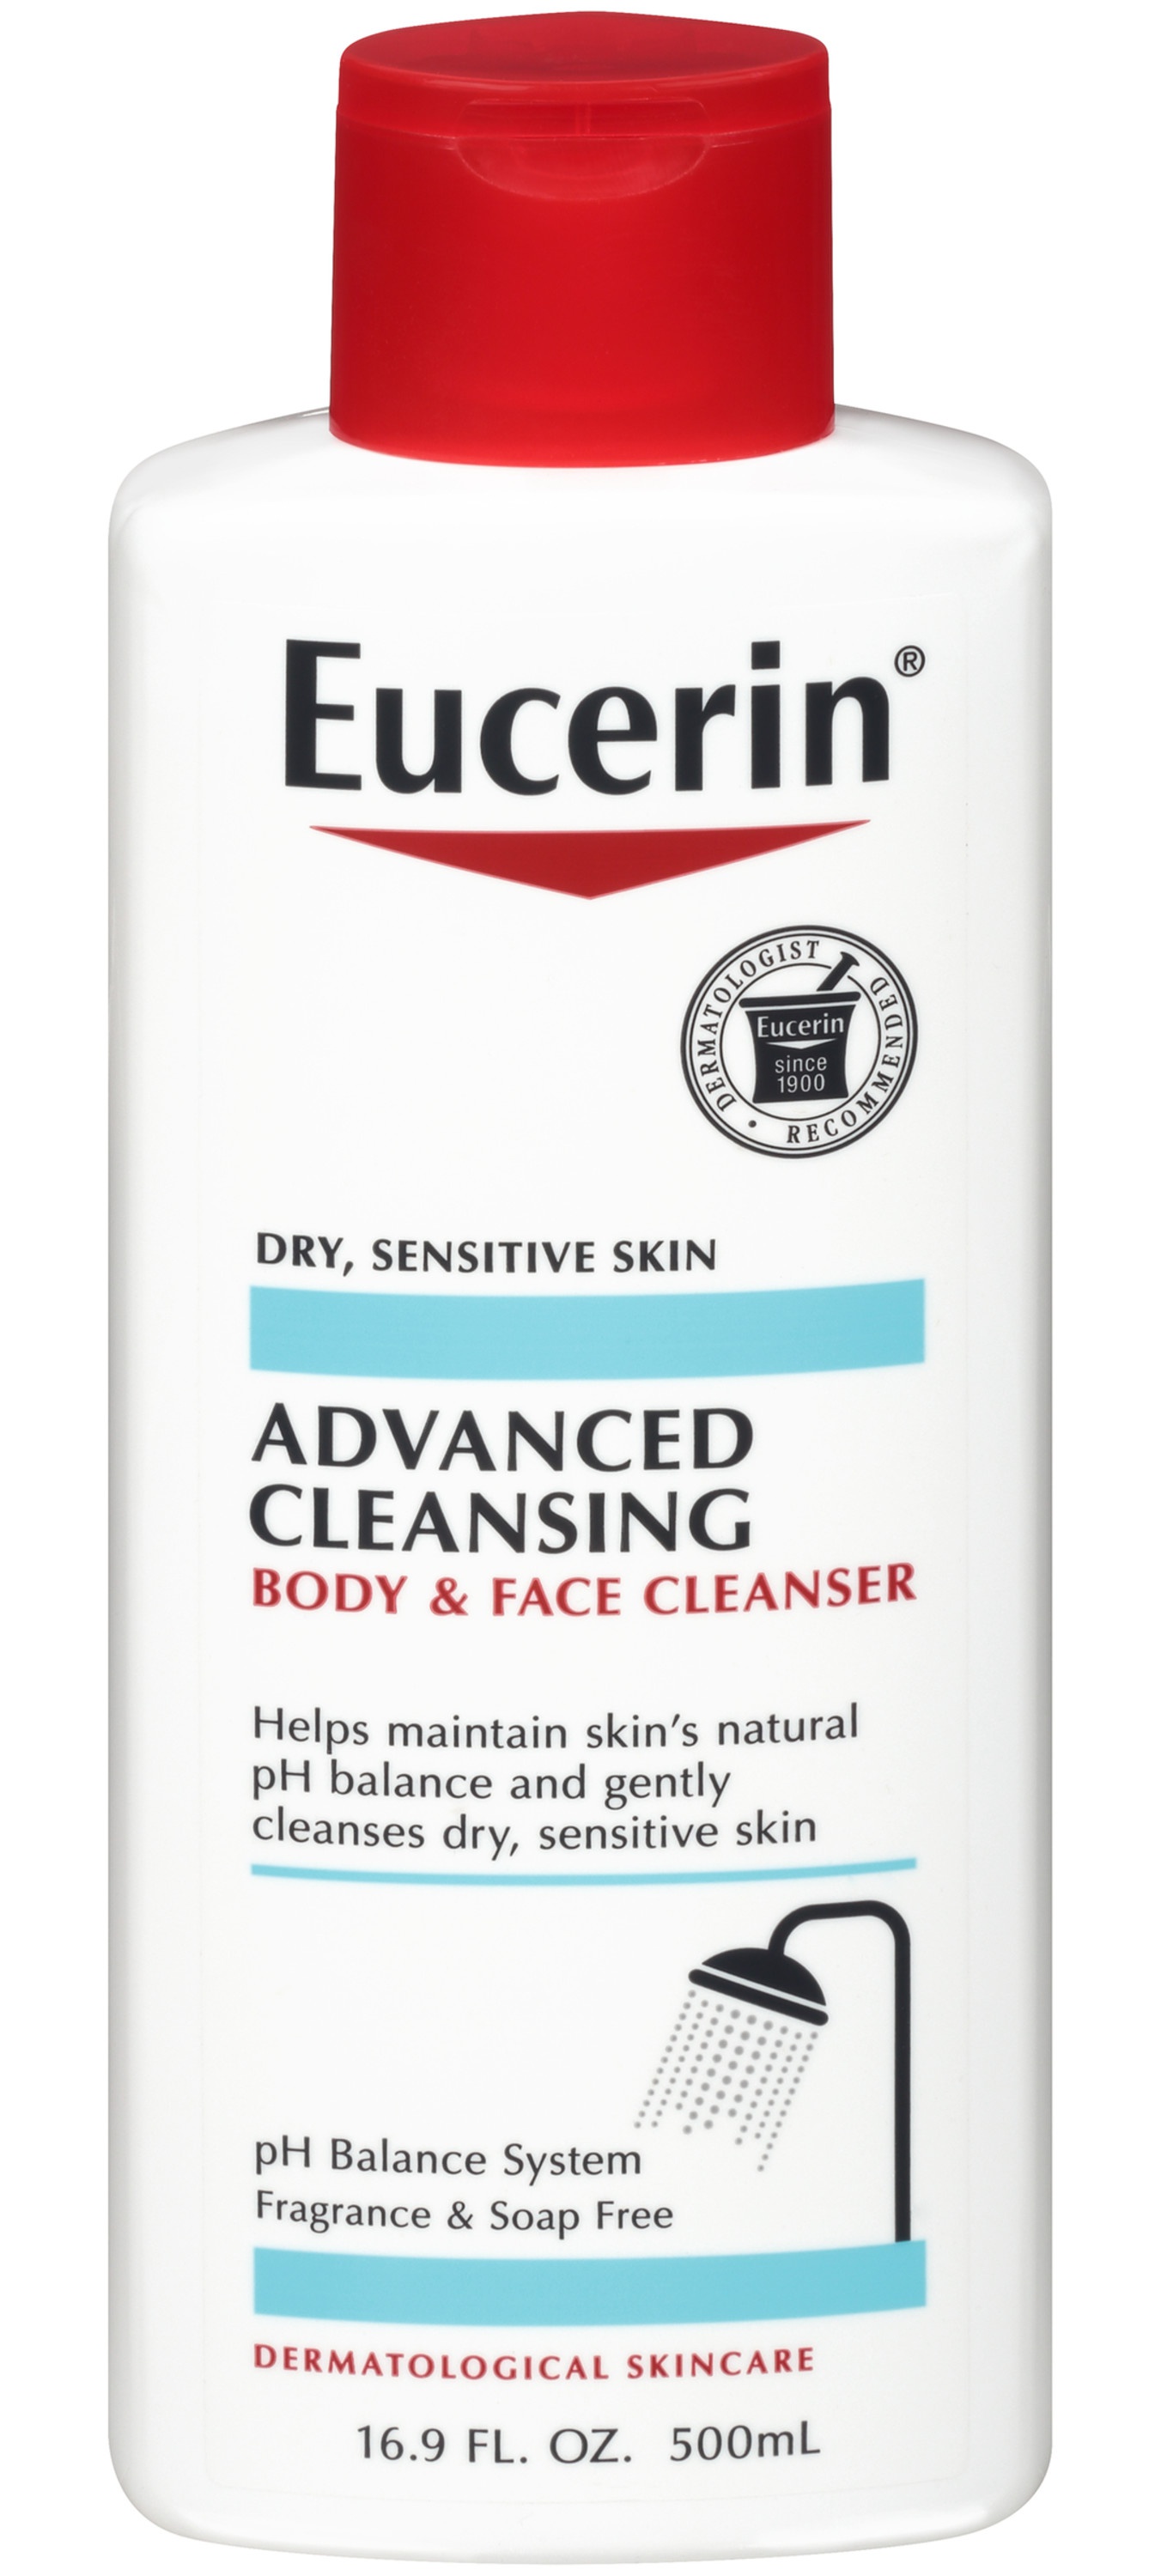 Eucerin Advanced Cleansing Body & Face